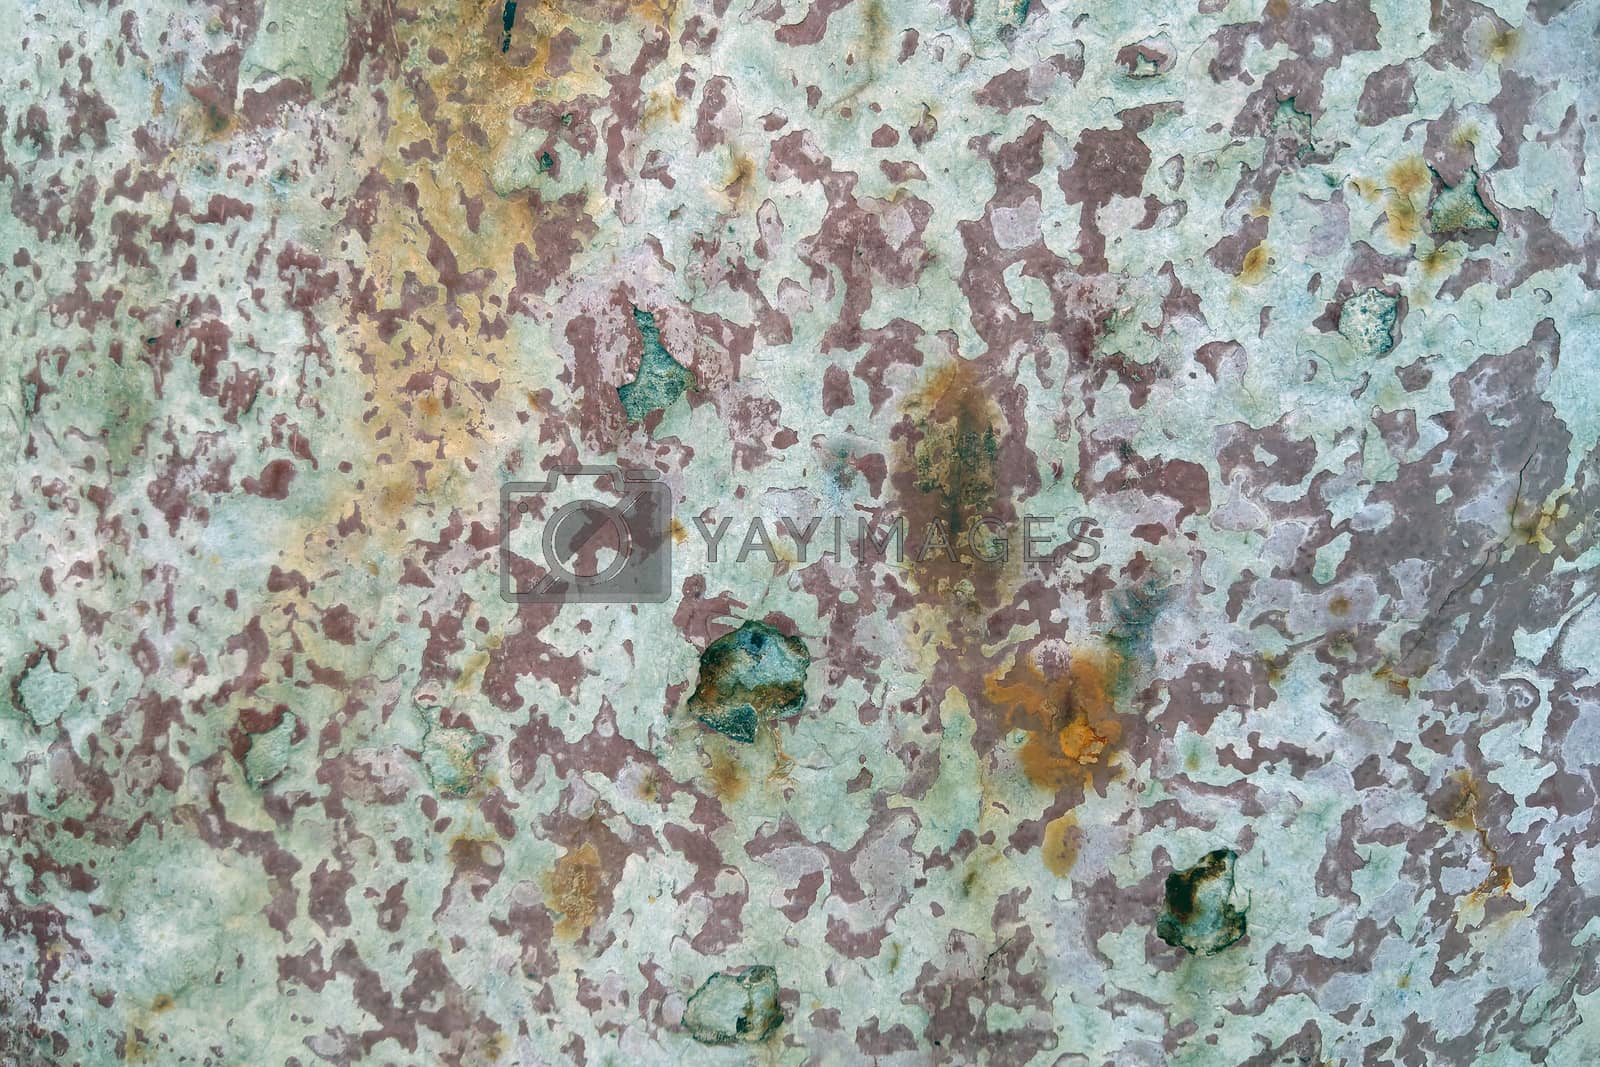 Royalty free image of A piece of metal with peeled paint and a rusty part. Background, texture. by kip02kas